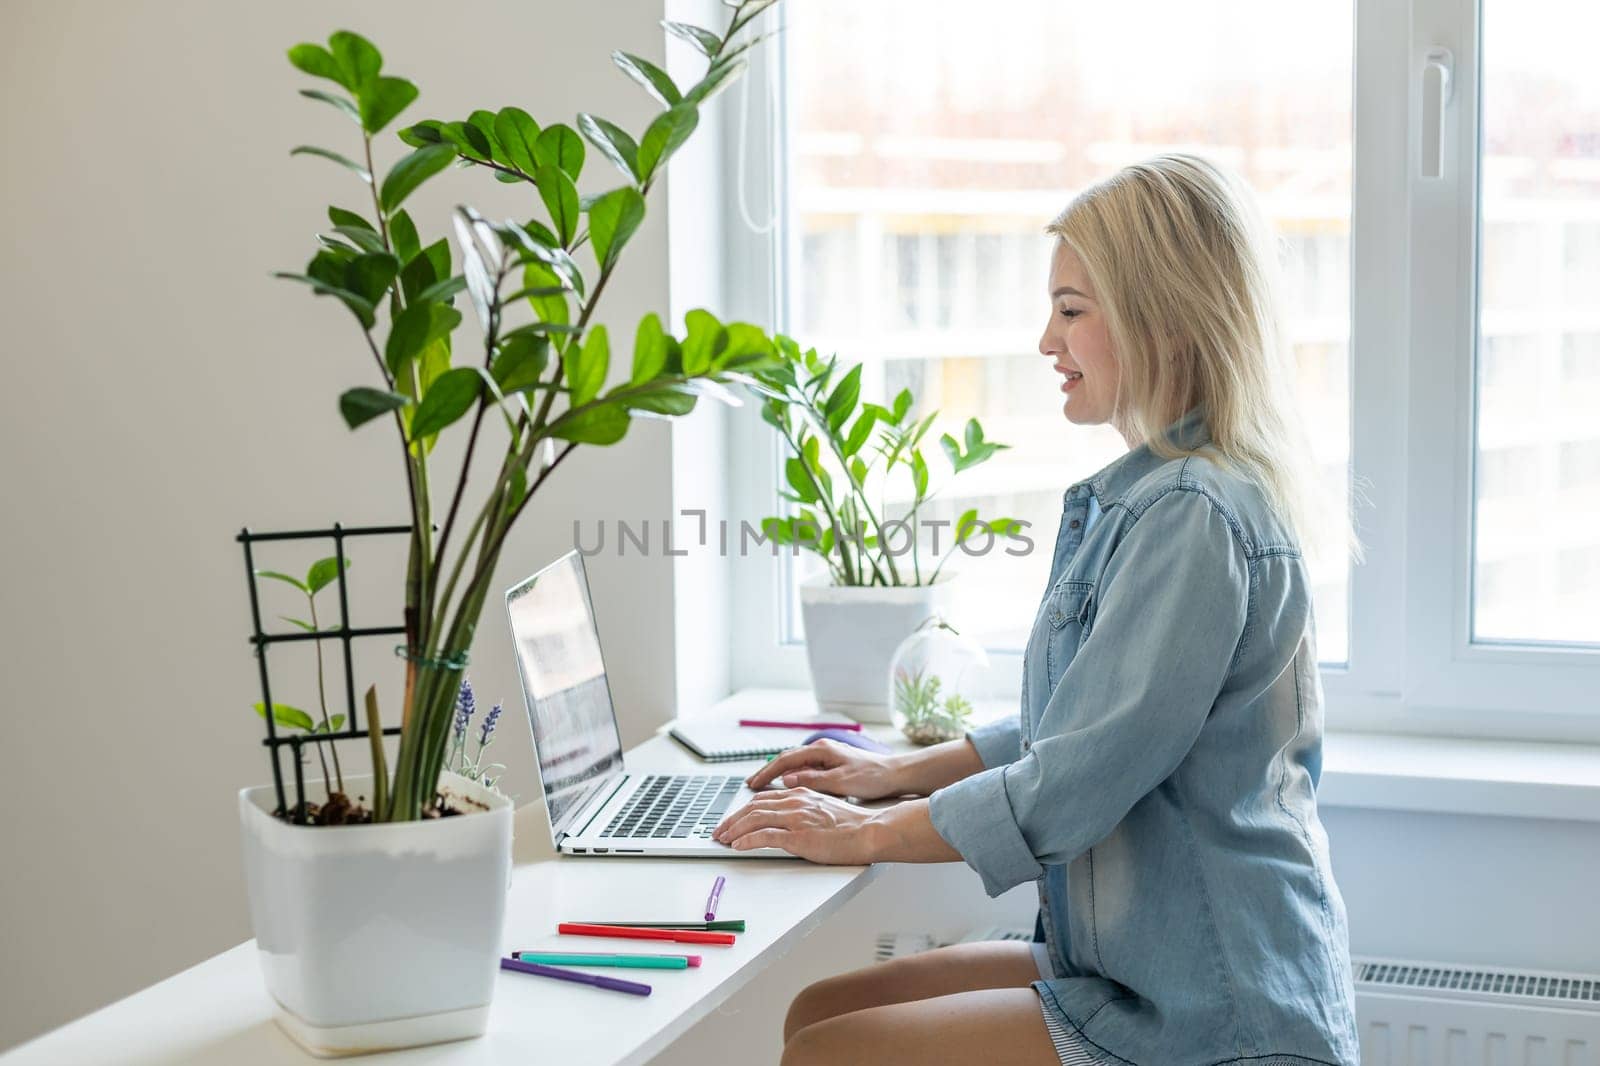 Woman on remote work or online education, using laptop computer, making notes, indoors at office or home at daytime. Online business, young professional at workplace. Working from home.